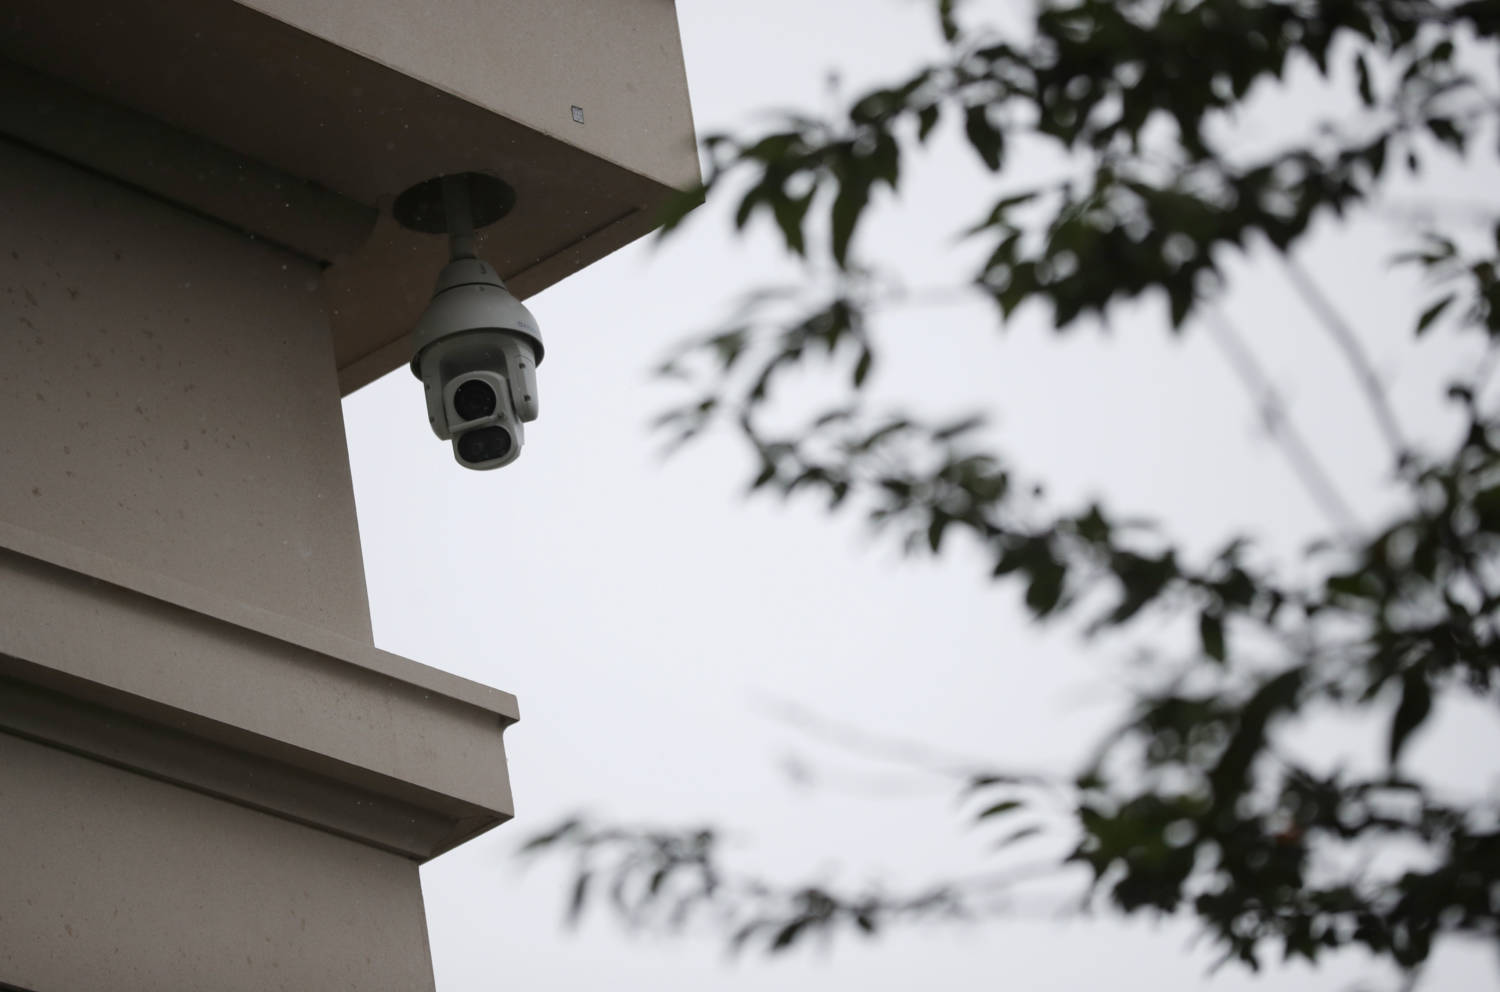 UK to remove Chinese-made surveillance equipment from sensitive govt sites